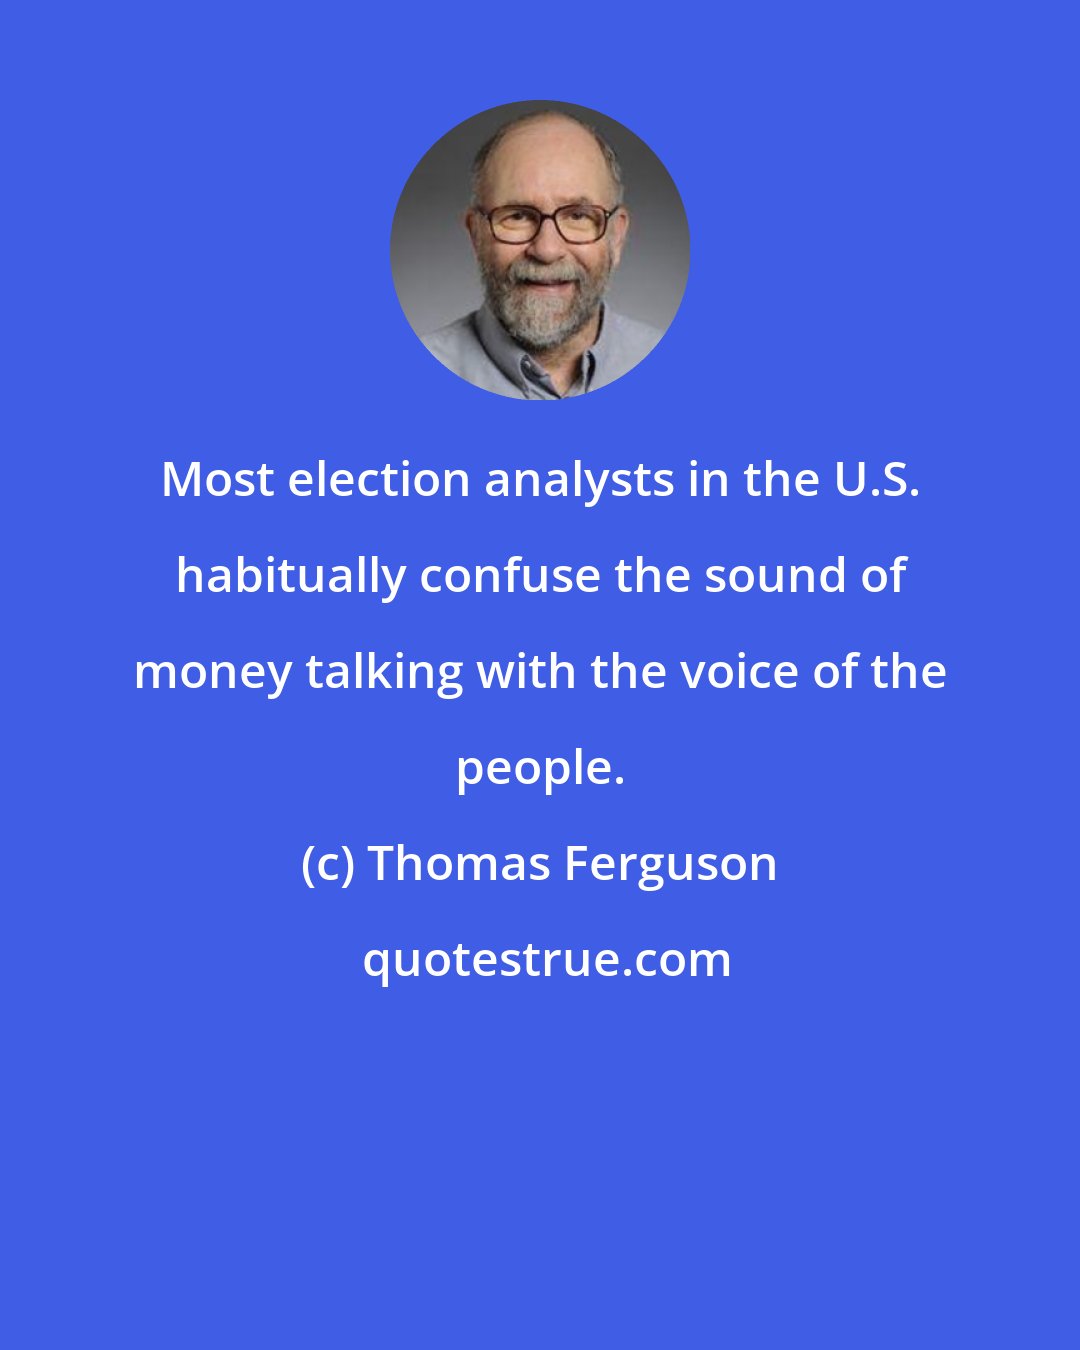 Thomas Ferguson: Most election analysts in the U.S. habitually confuse the sound of money talking with the voice of the people.